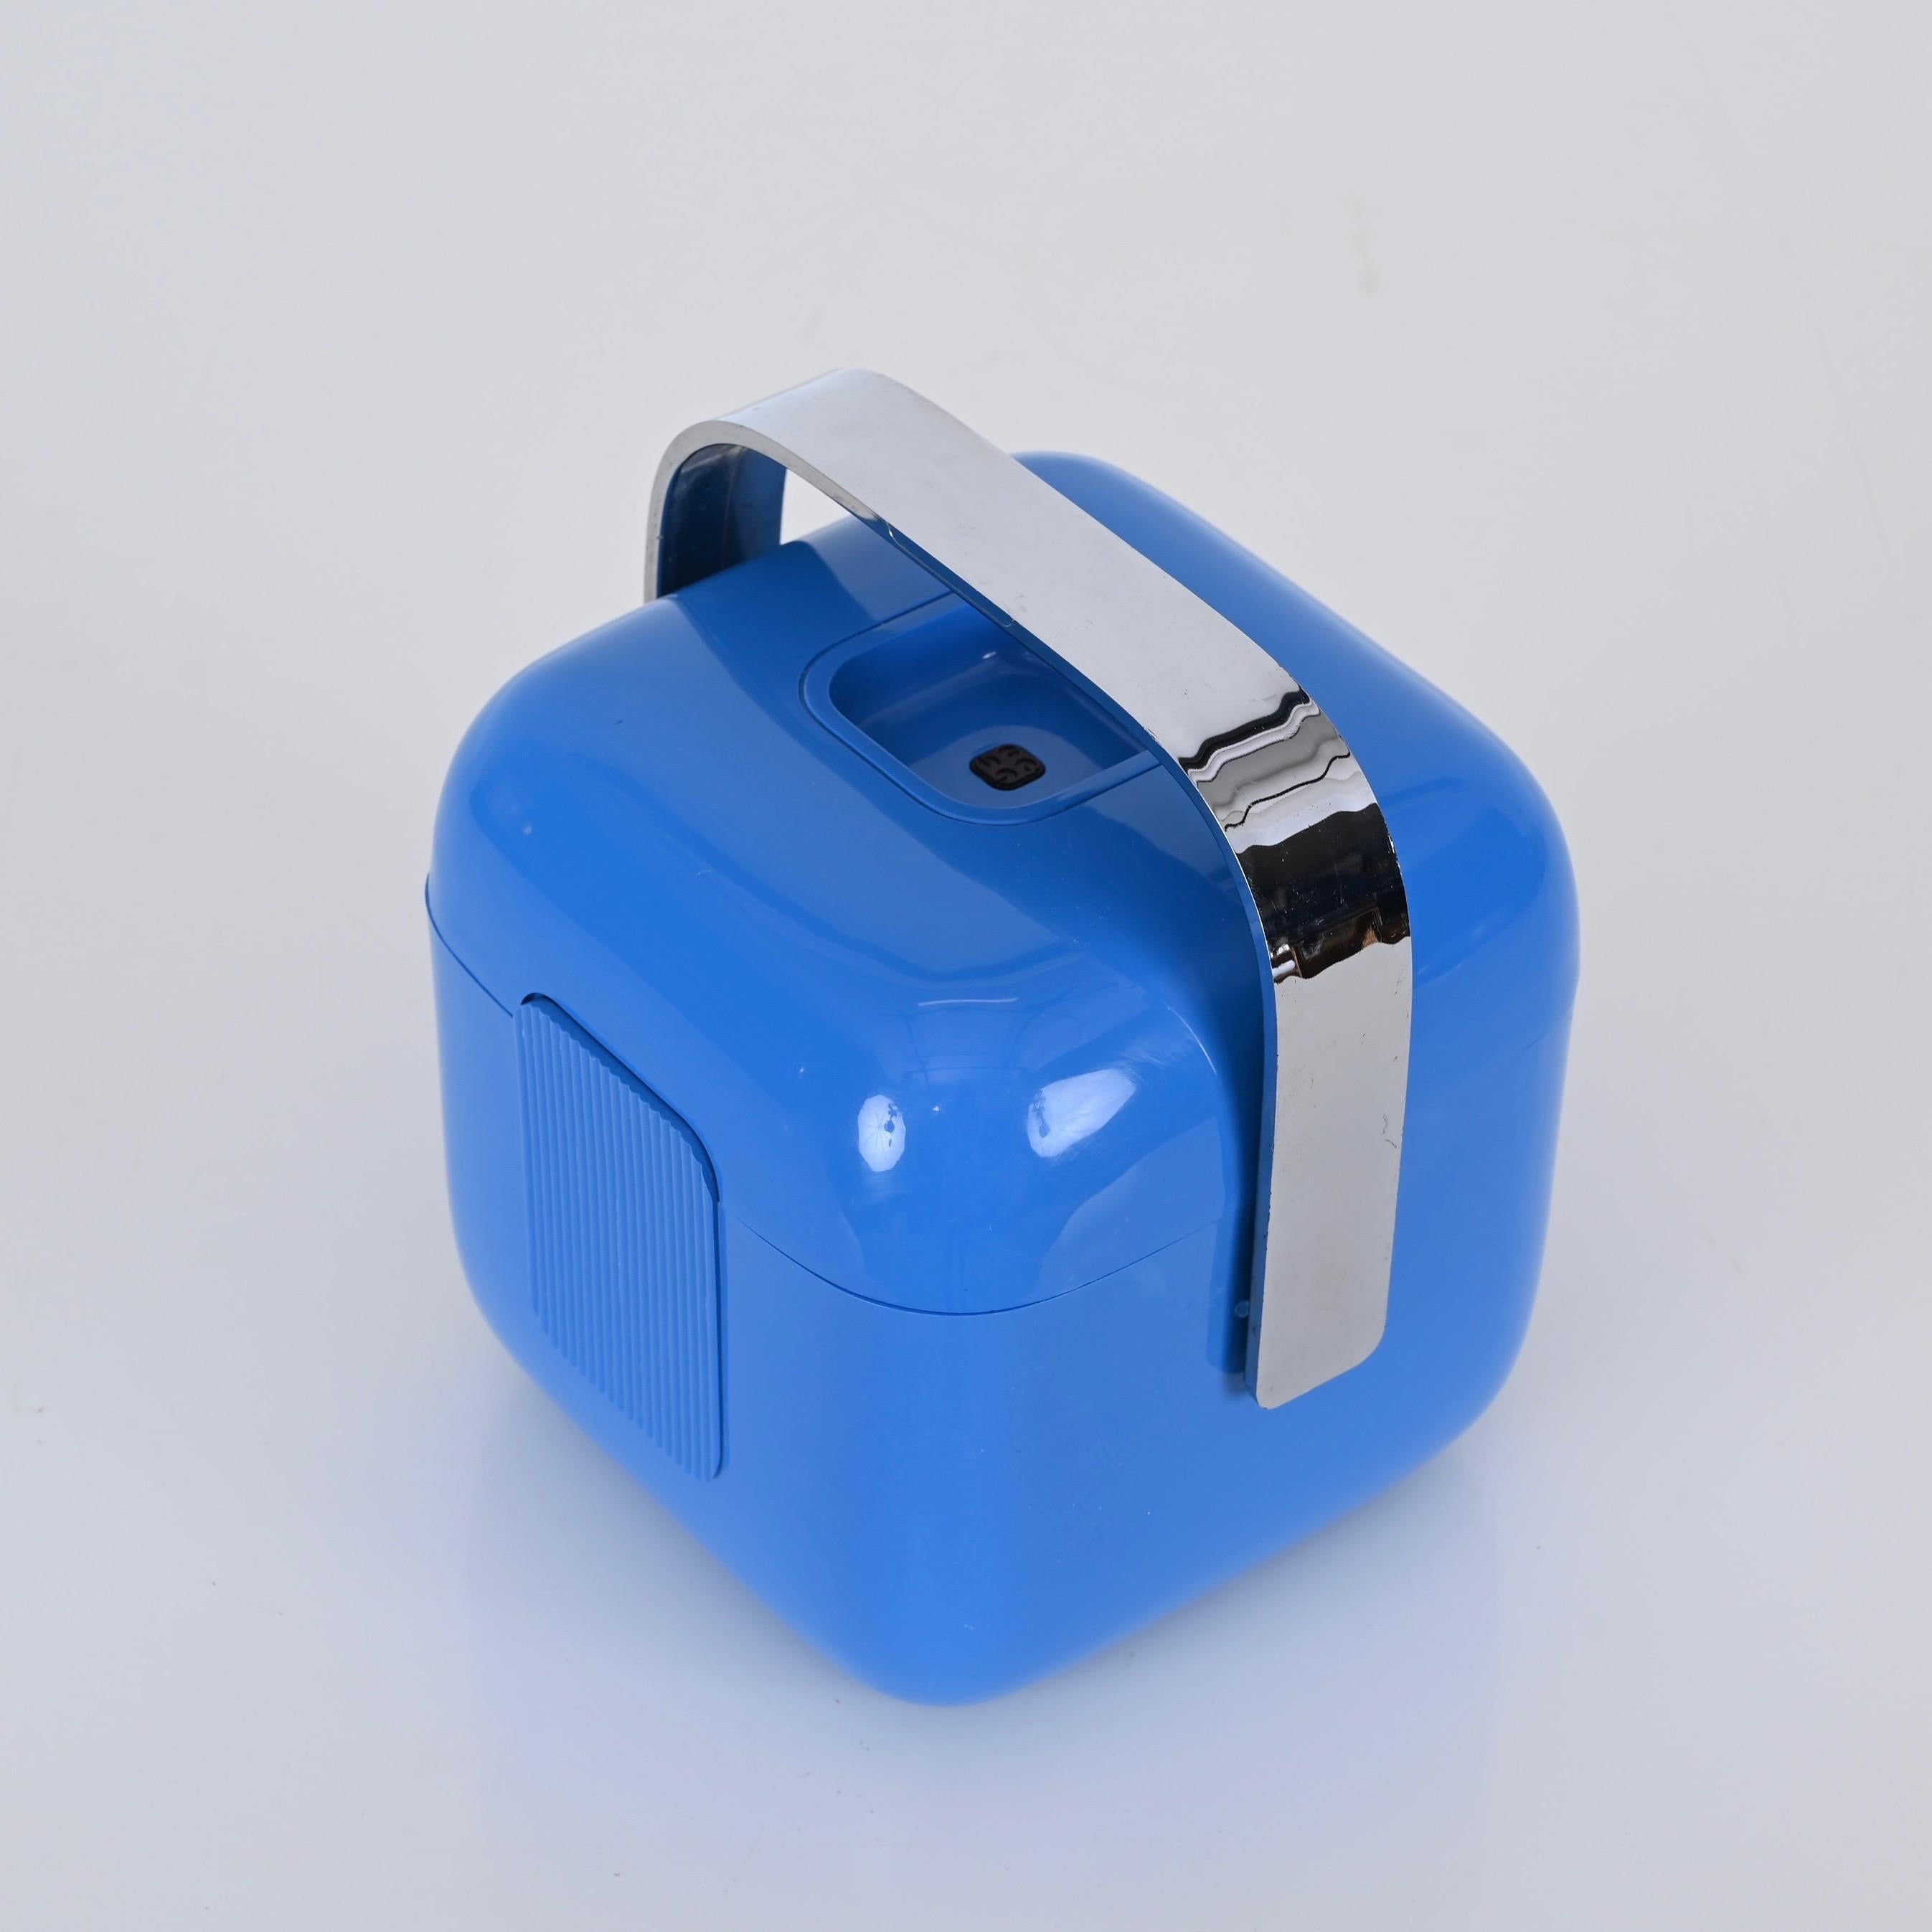 Plastic Azure and Chrome Italian Ice Bucket by Guzzini, Italy 1970s For Sale